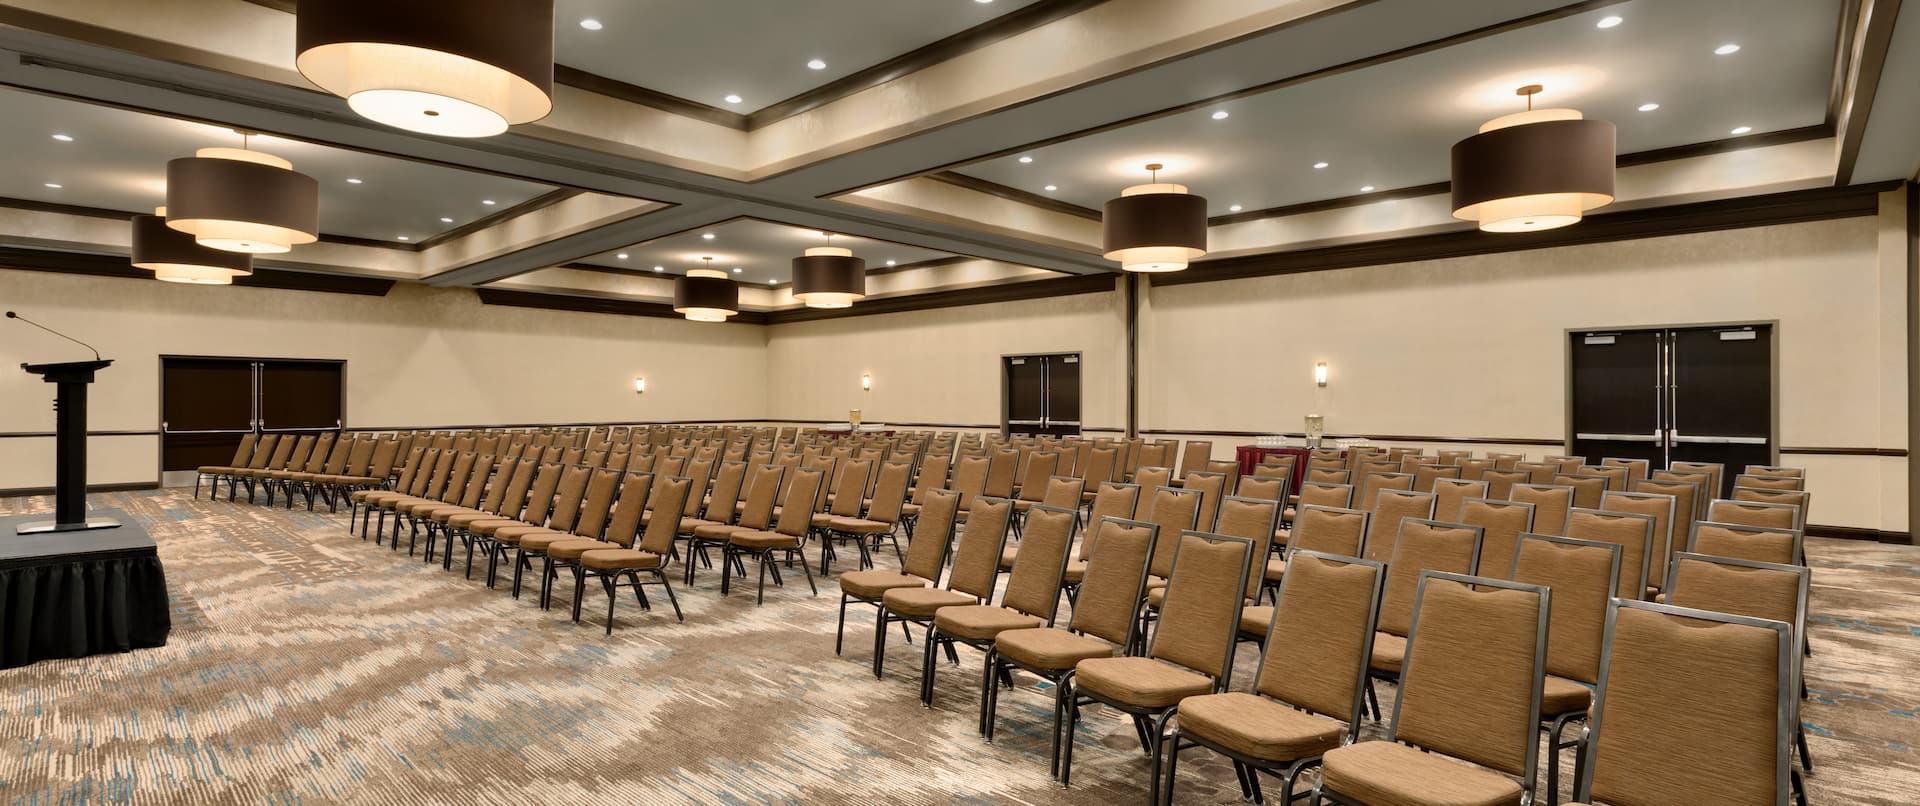 Ballroom Theater Setup with Rows of Chairs